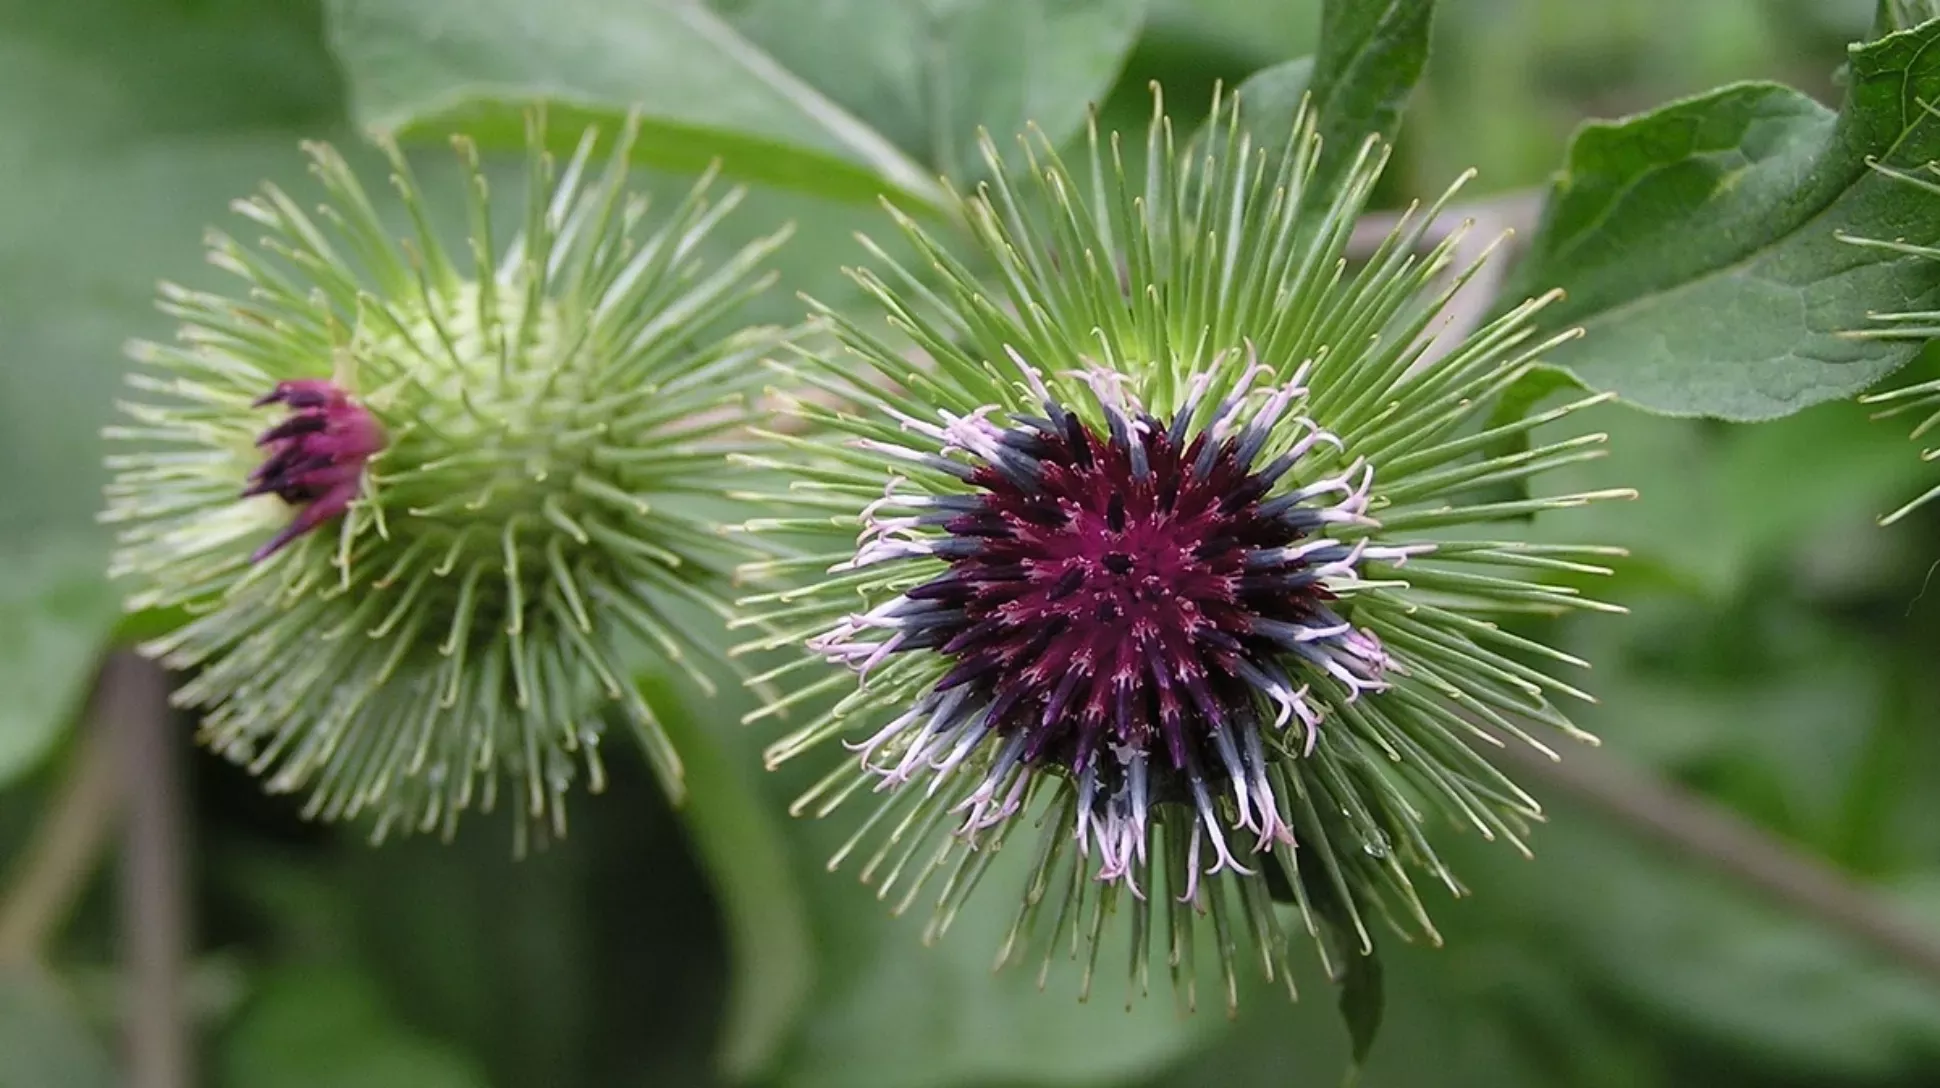 Spiked green seed pods with a purple centre